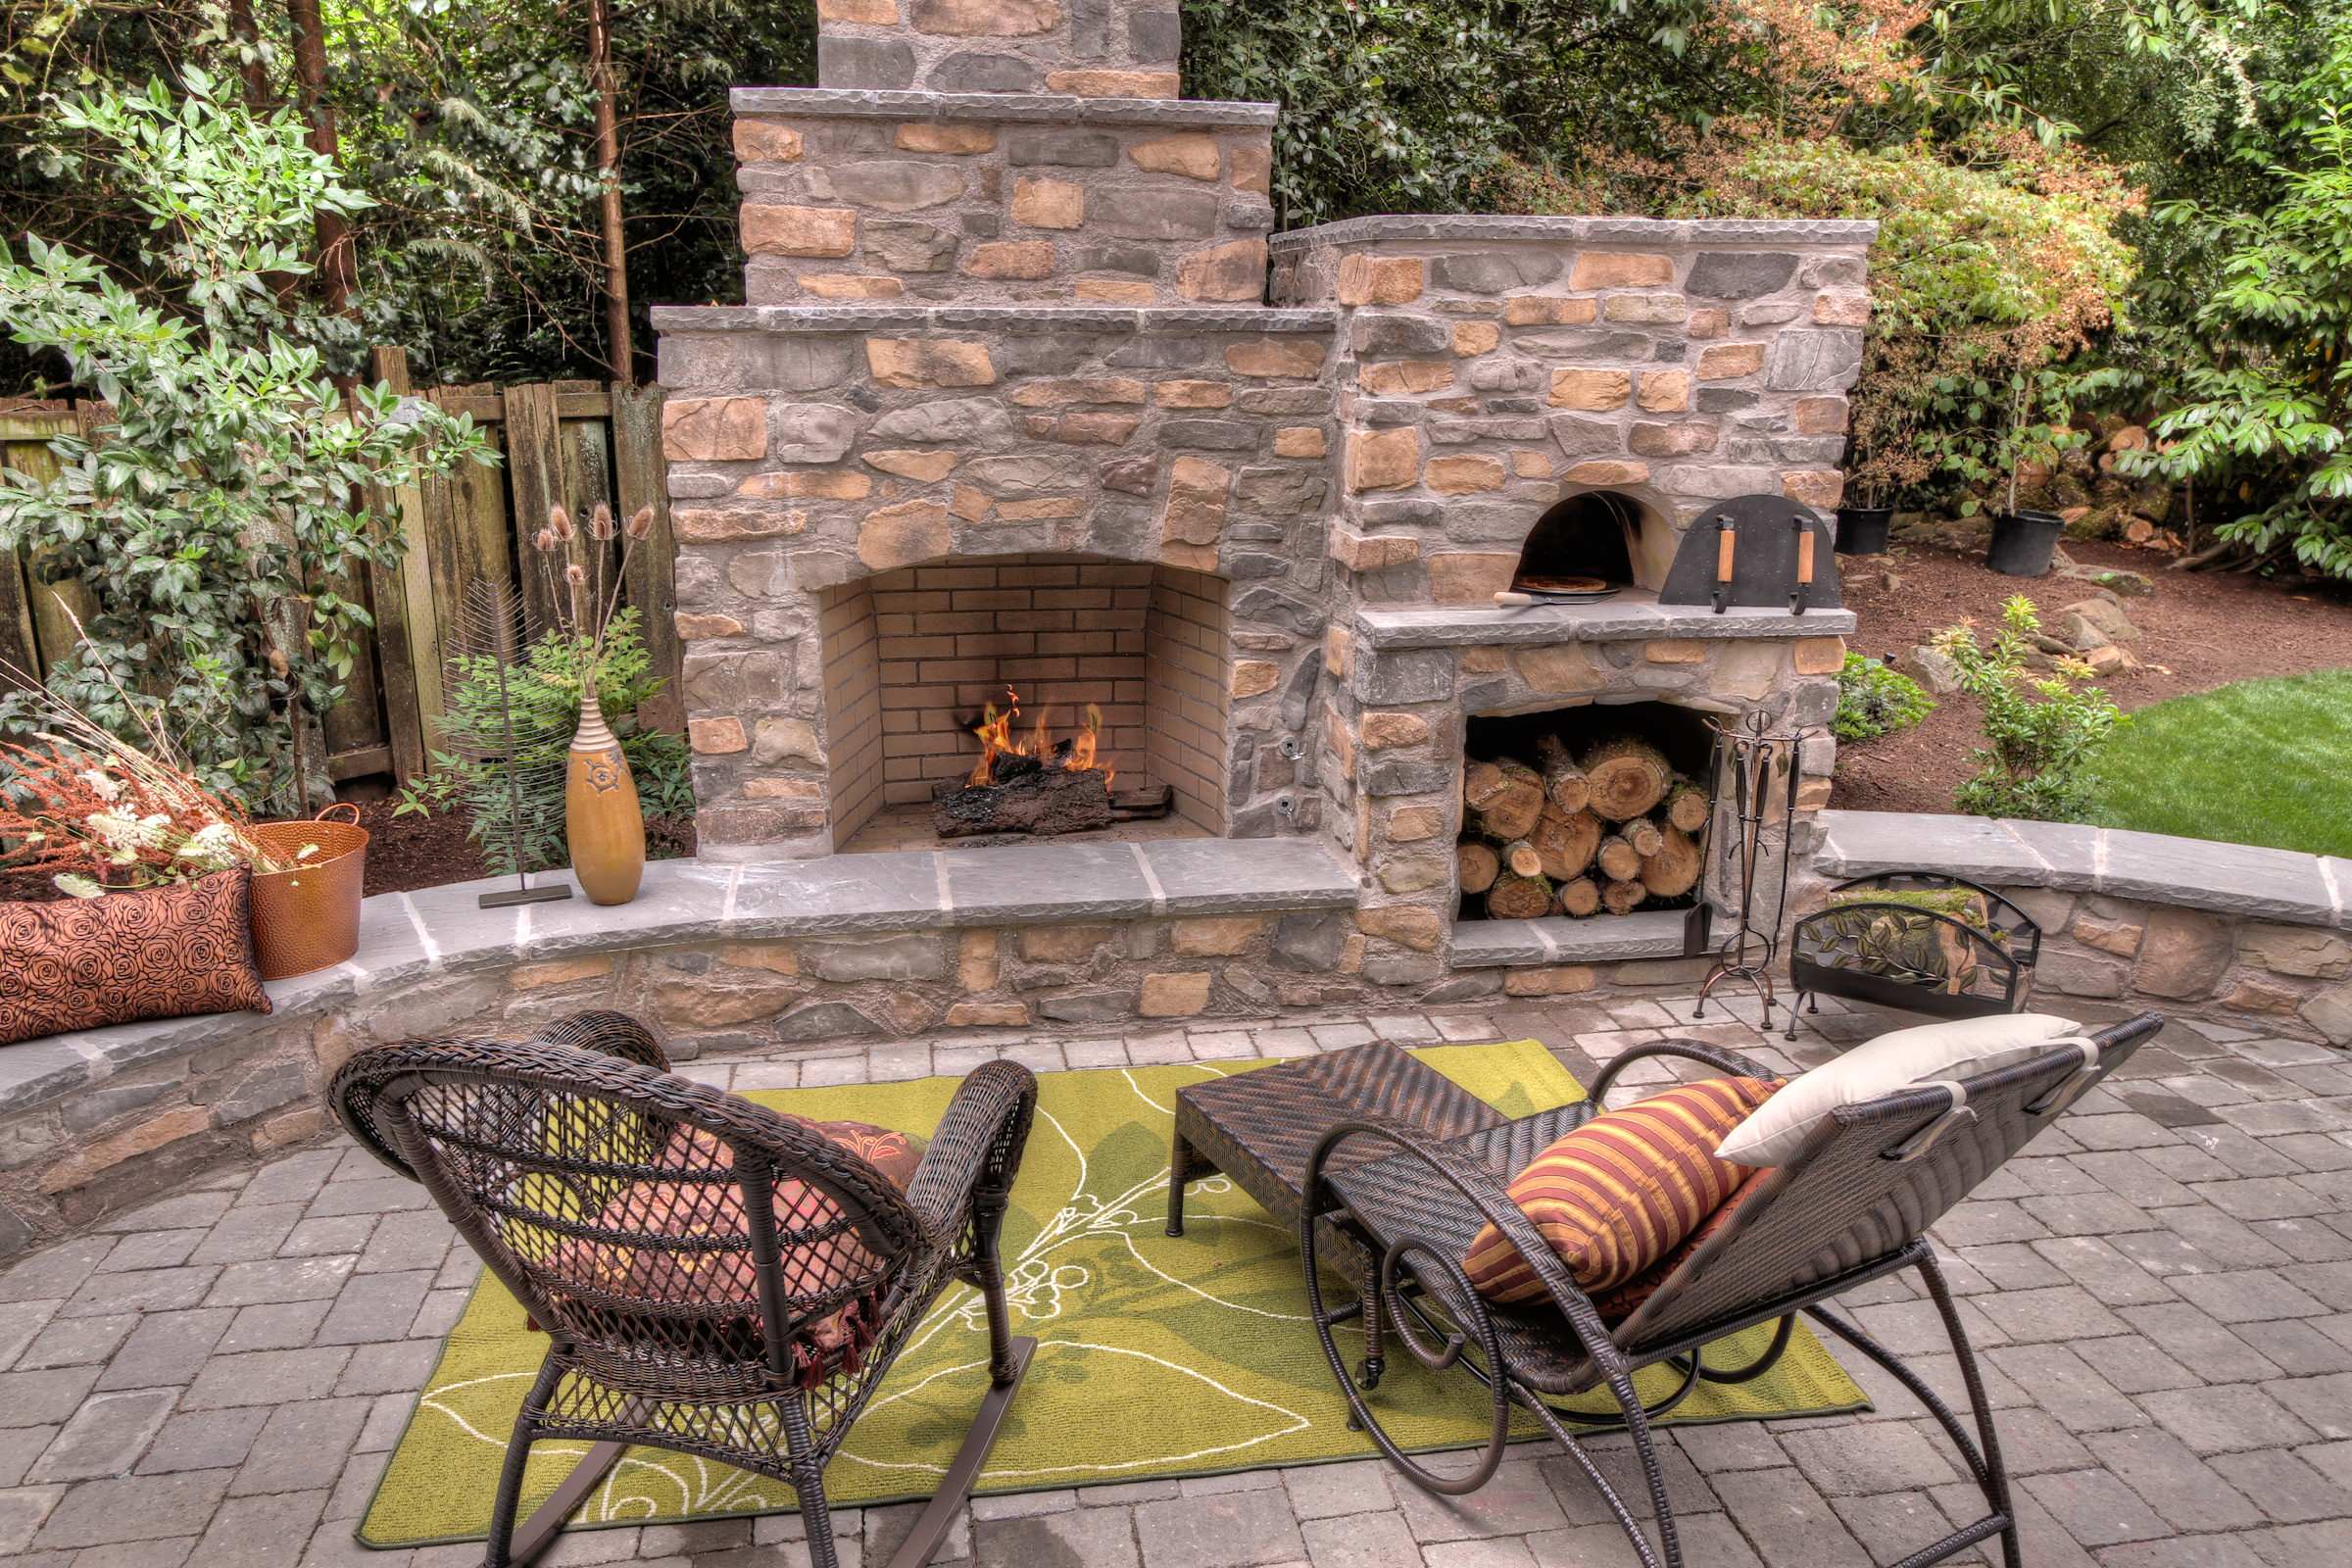 Outdoor Fireplace With Pizza Oven, Pictures Of Outdoor Fireplaces And Pizza Ovens